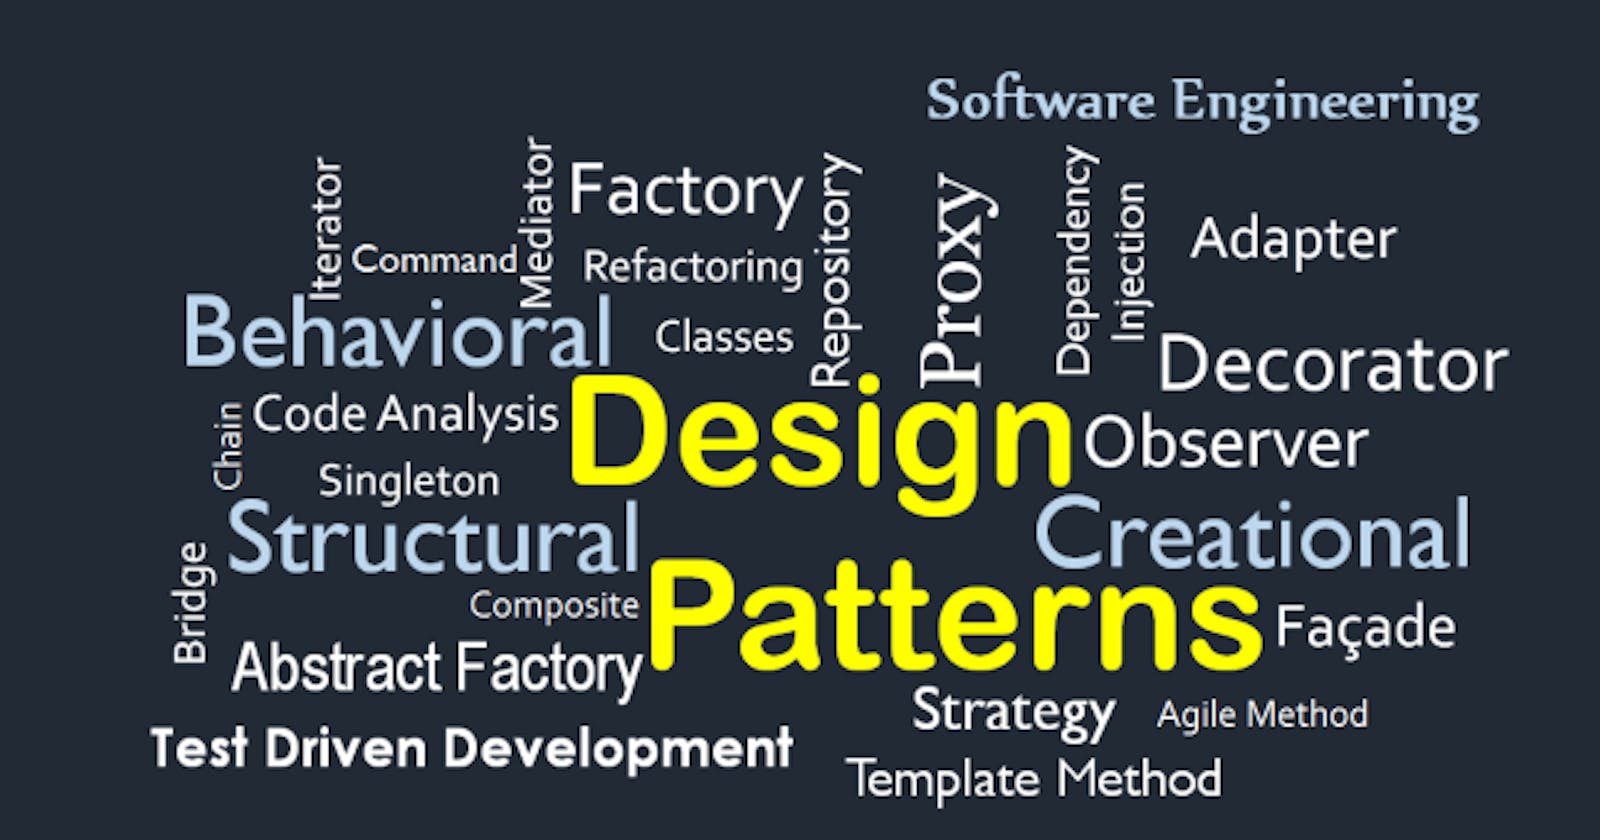 An Introduction to Design Patterns and Pattern Elements